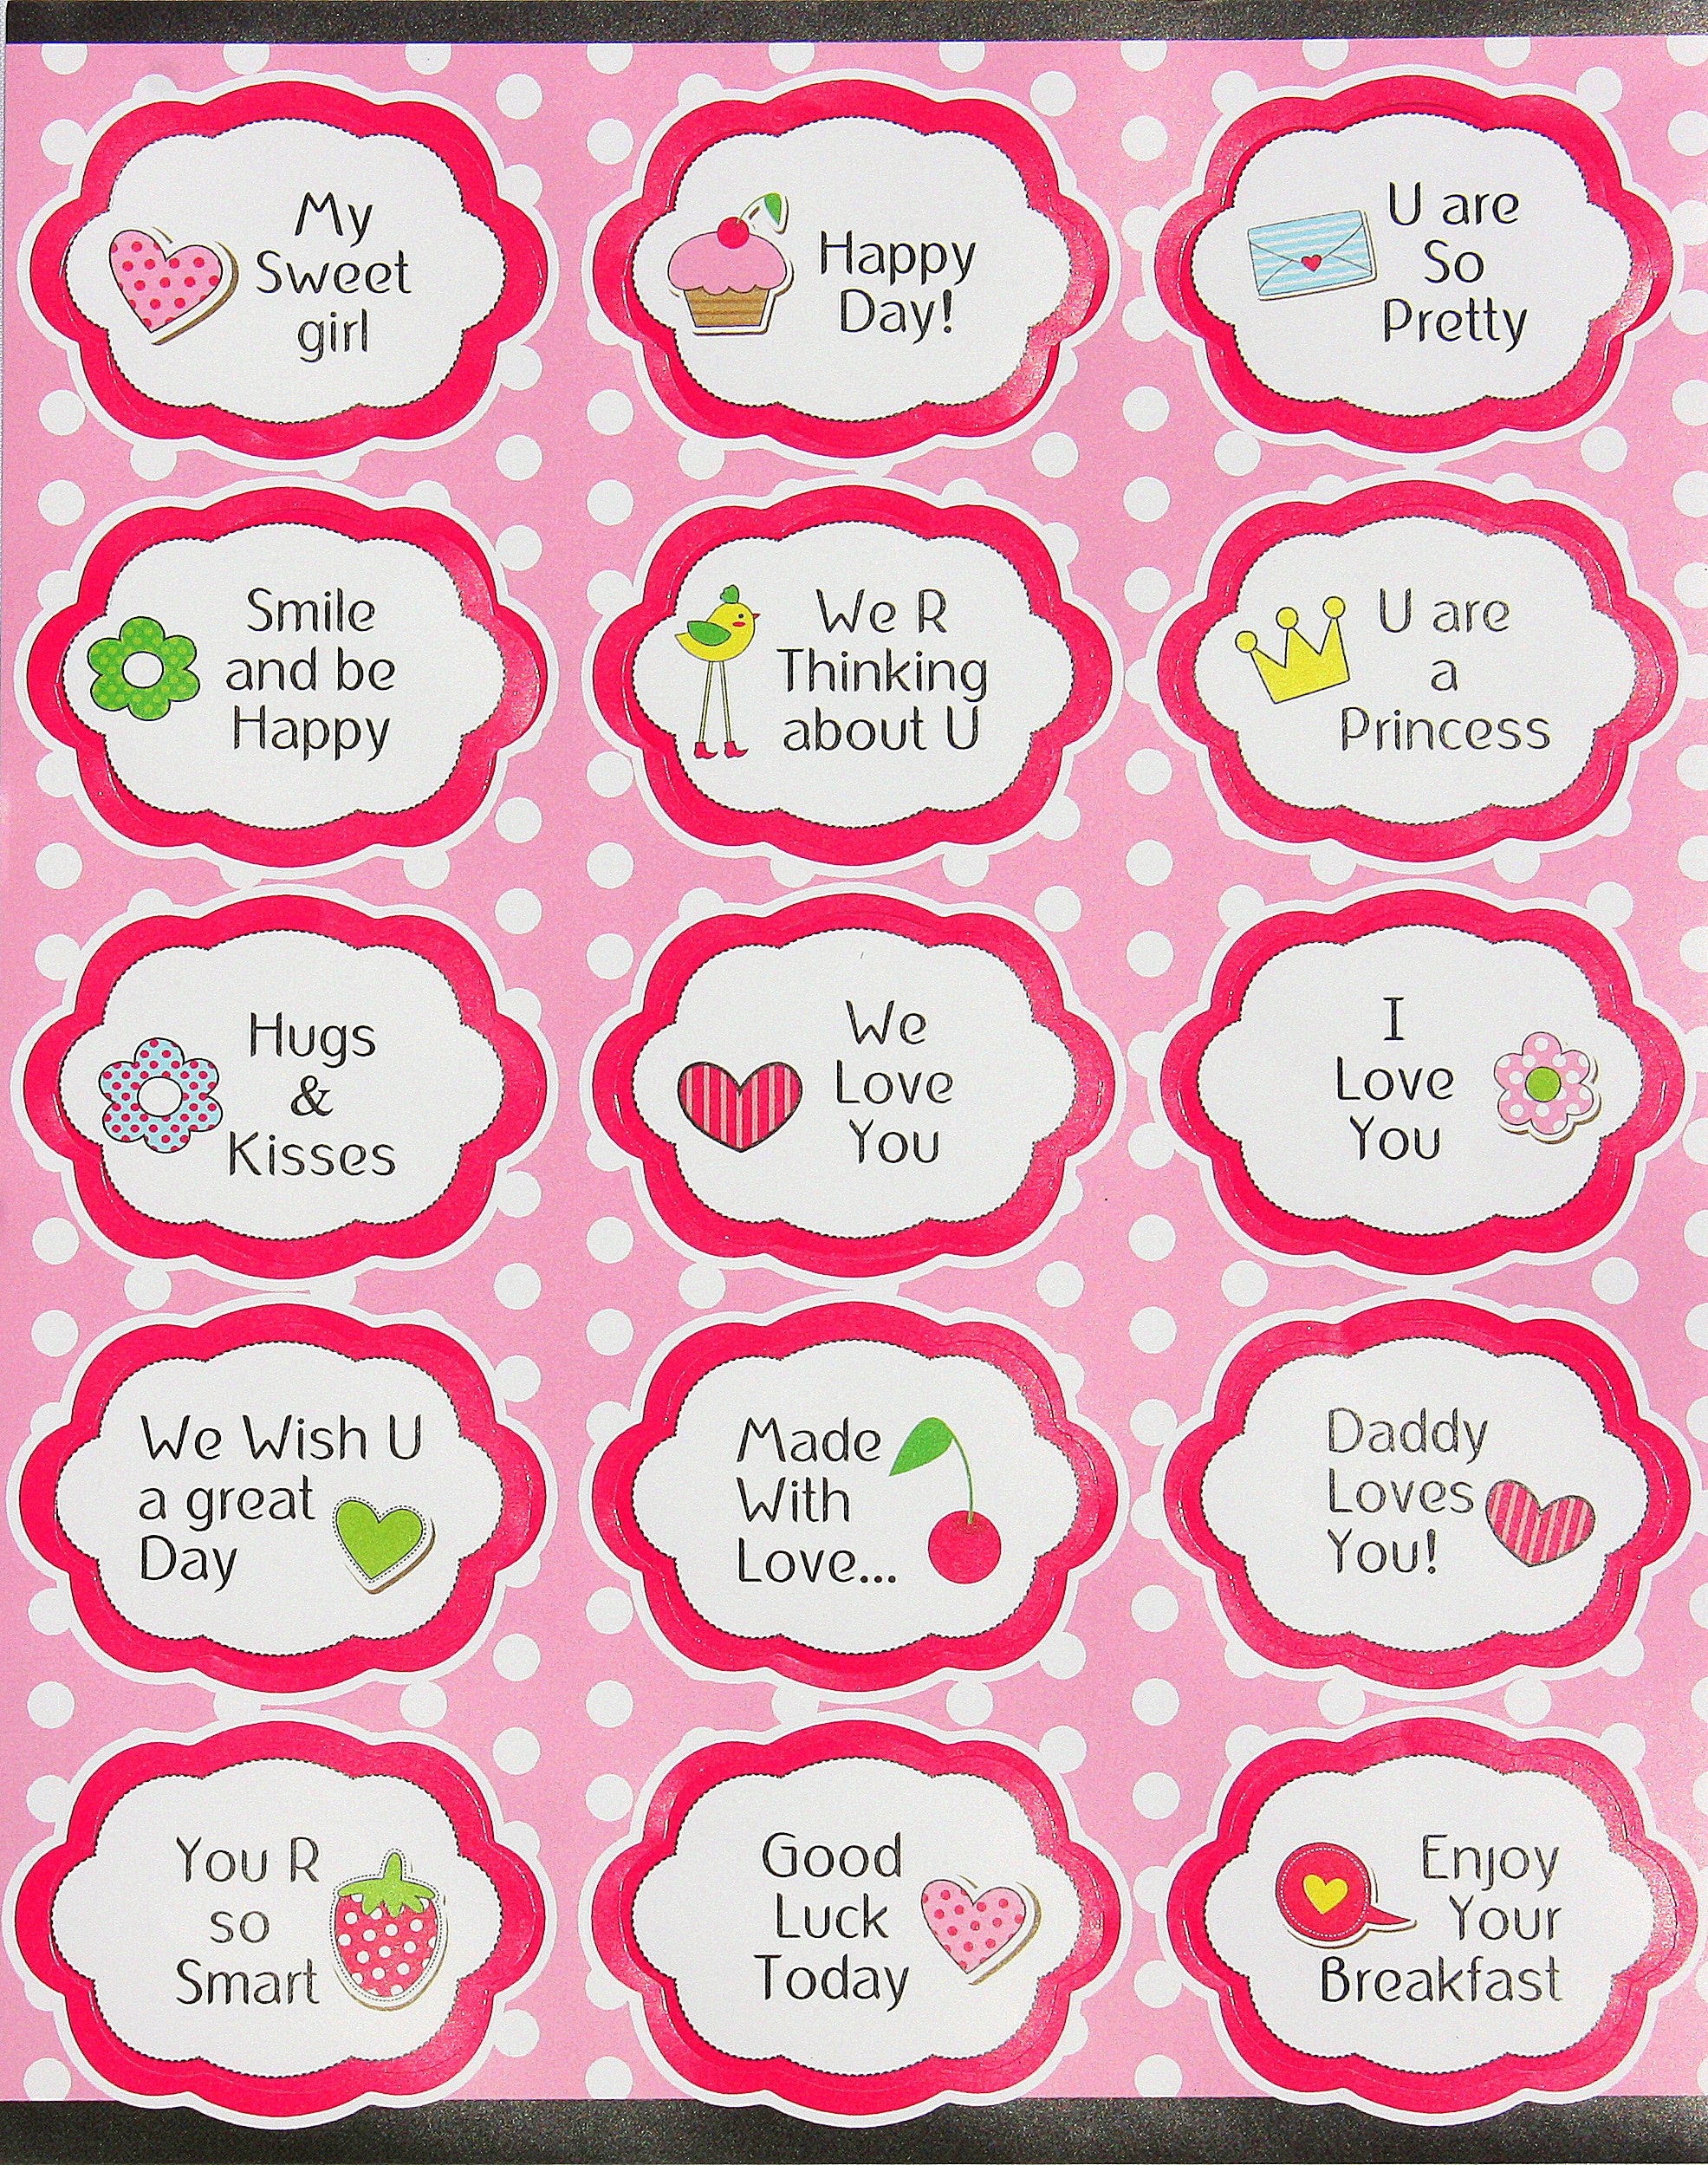 Encouragement Stickers for Sale